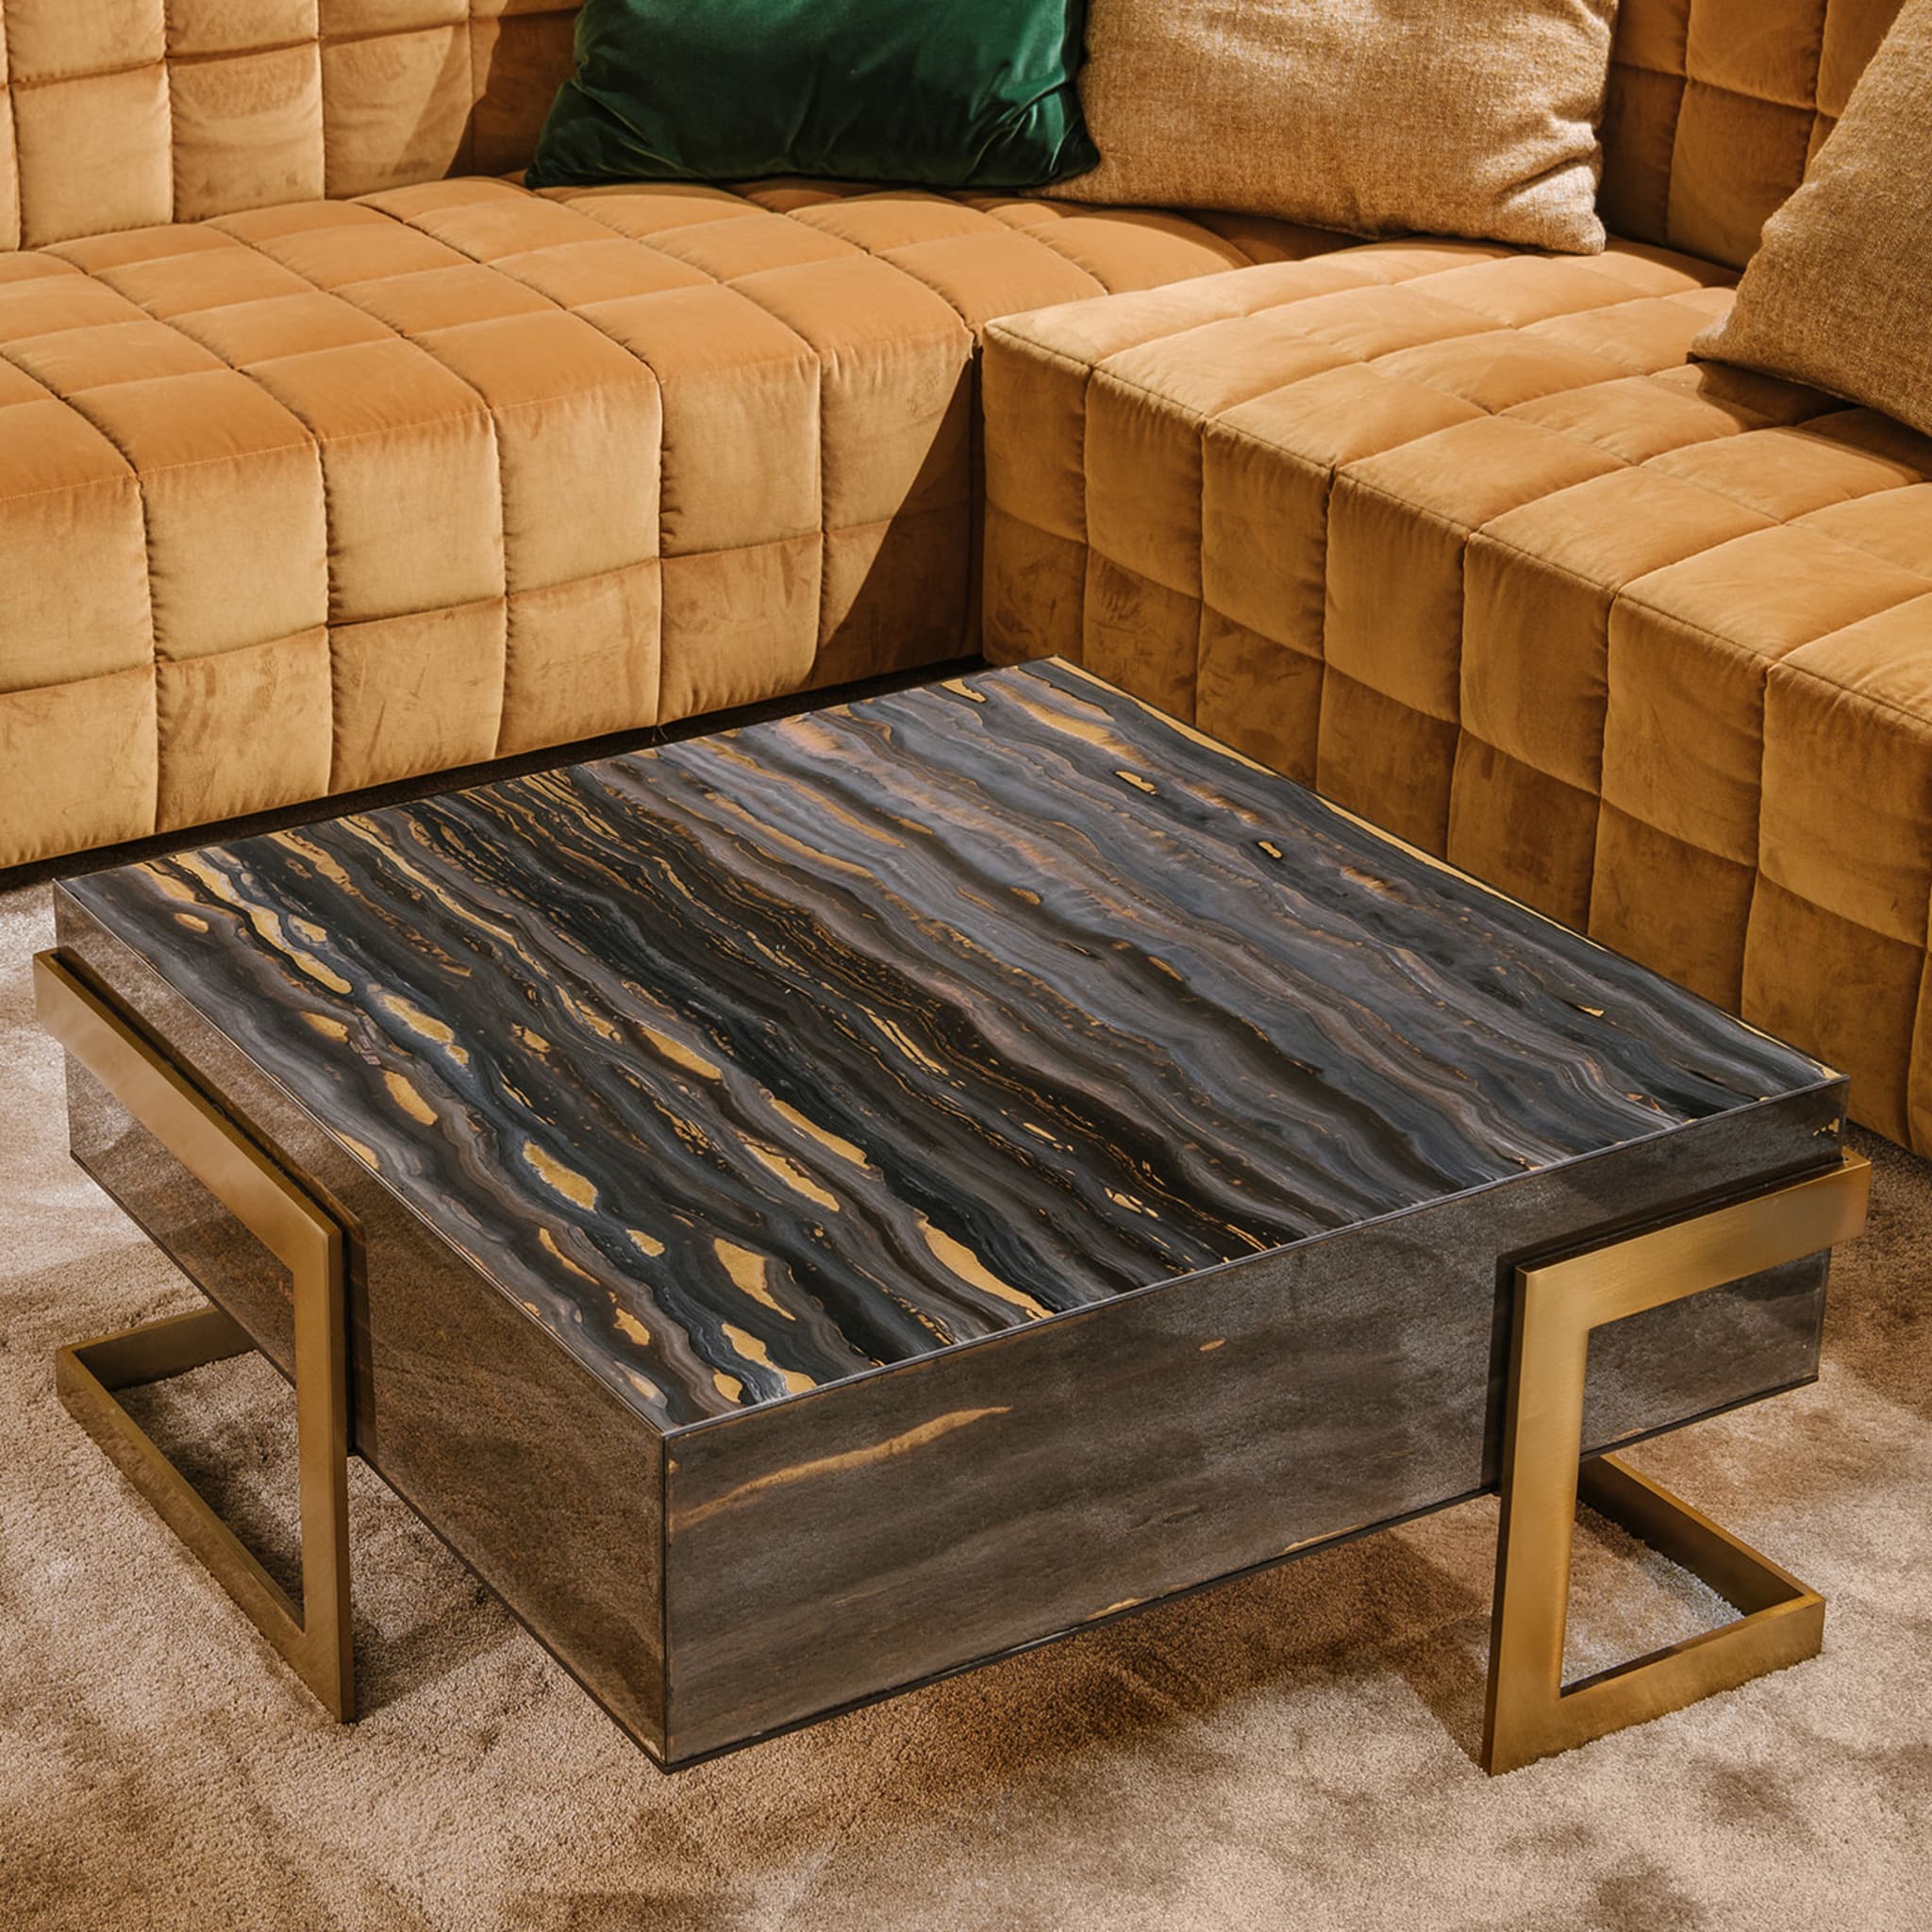 Holbrook Coffee Table by Giannella Ventura - Alternative view 4